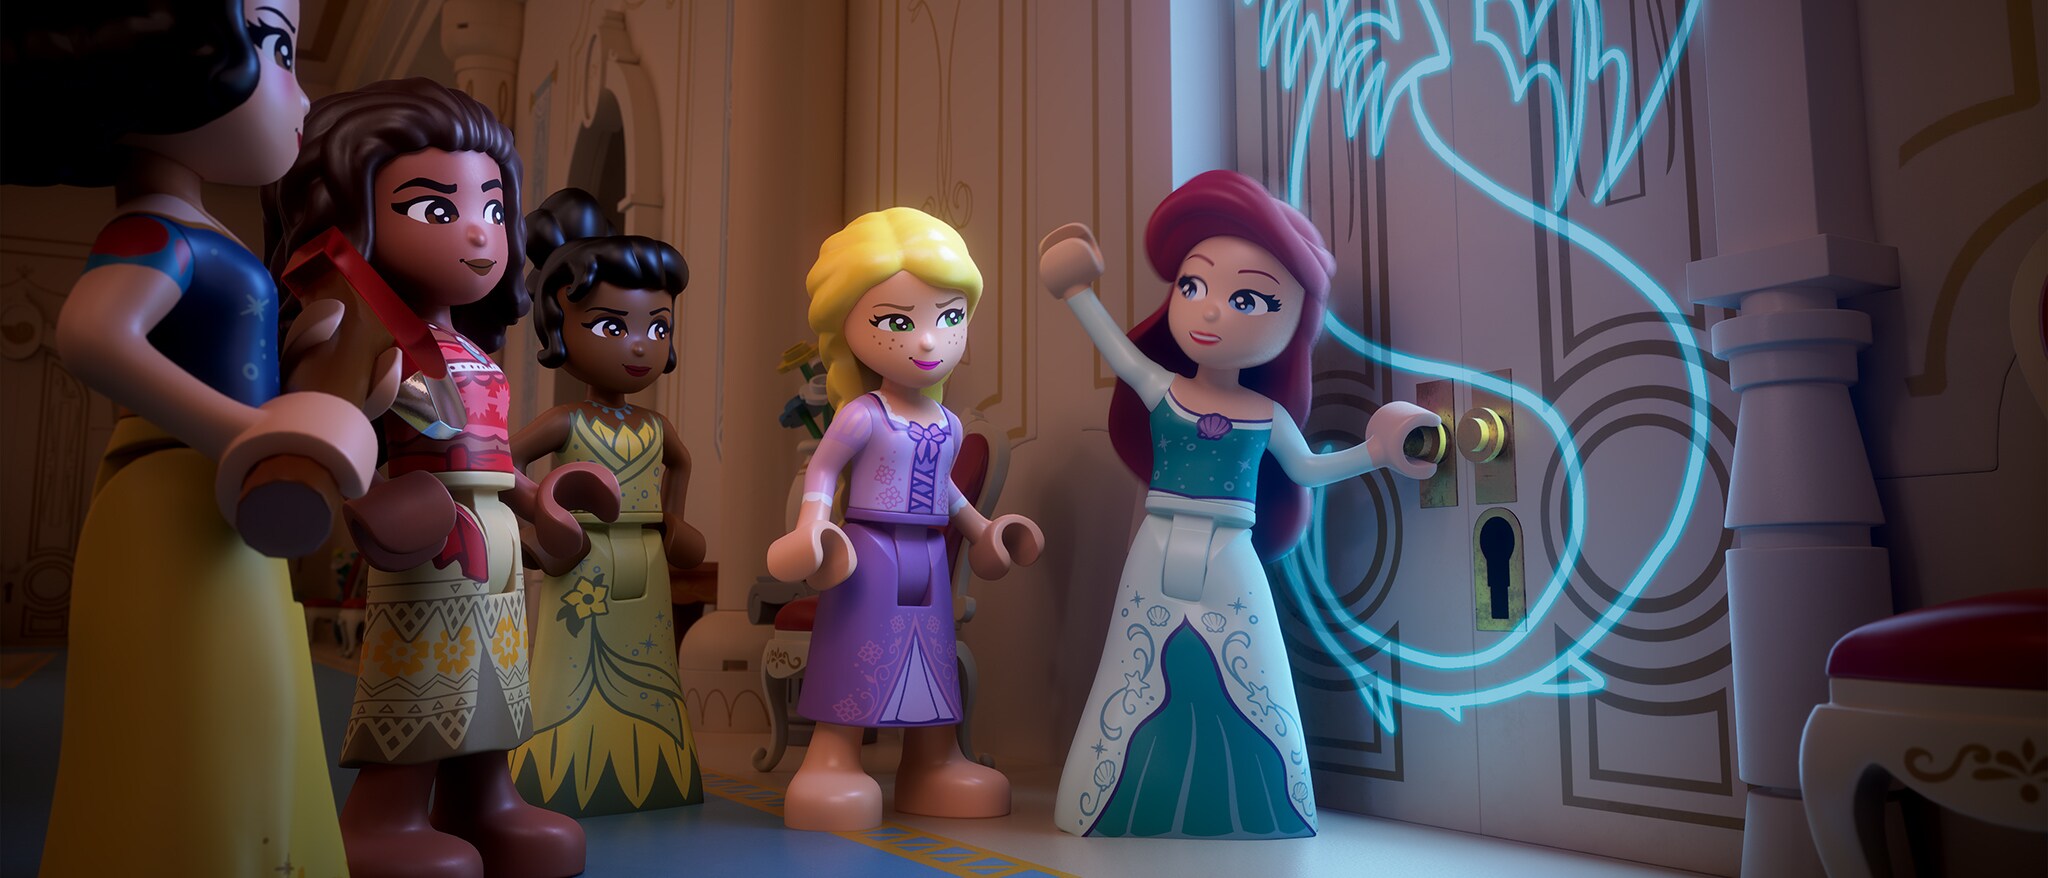 LEGO - Time to enter your royalty era 👑✨LEGO Disney Princess: The Castle  Quest is NOW STREAMING on Disney+!